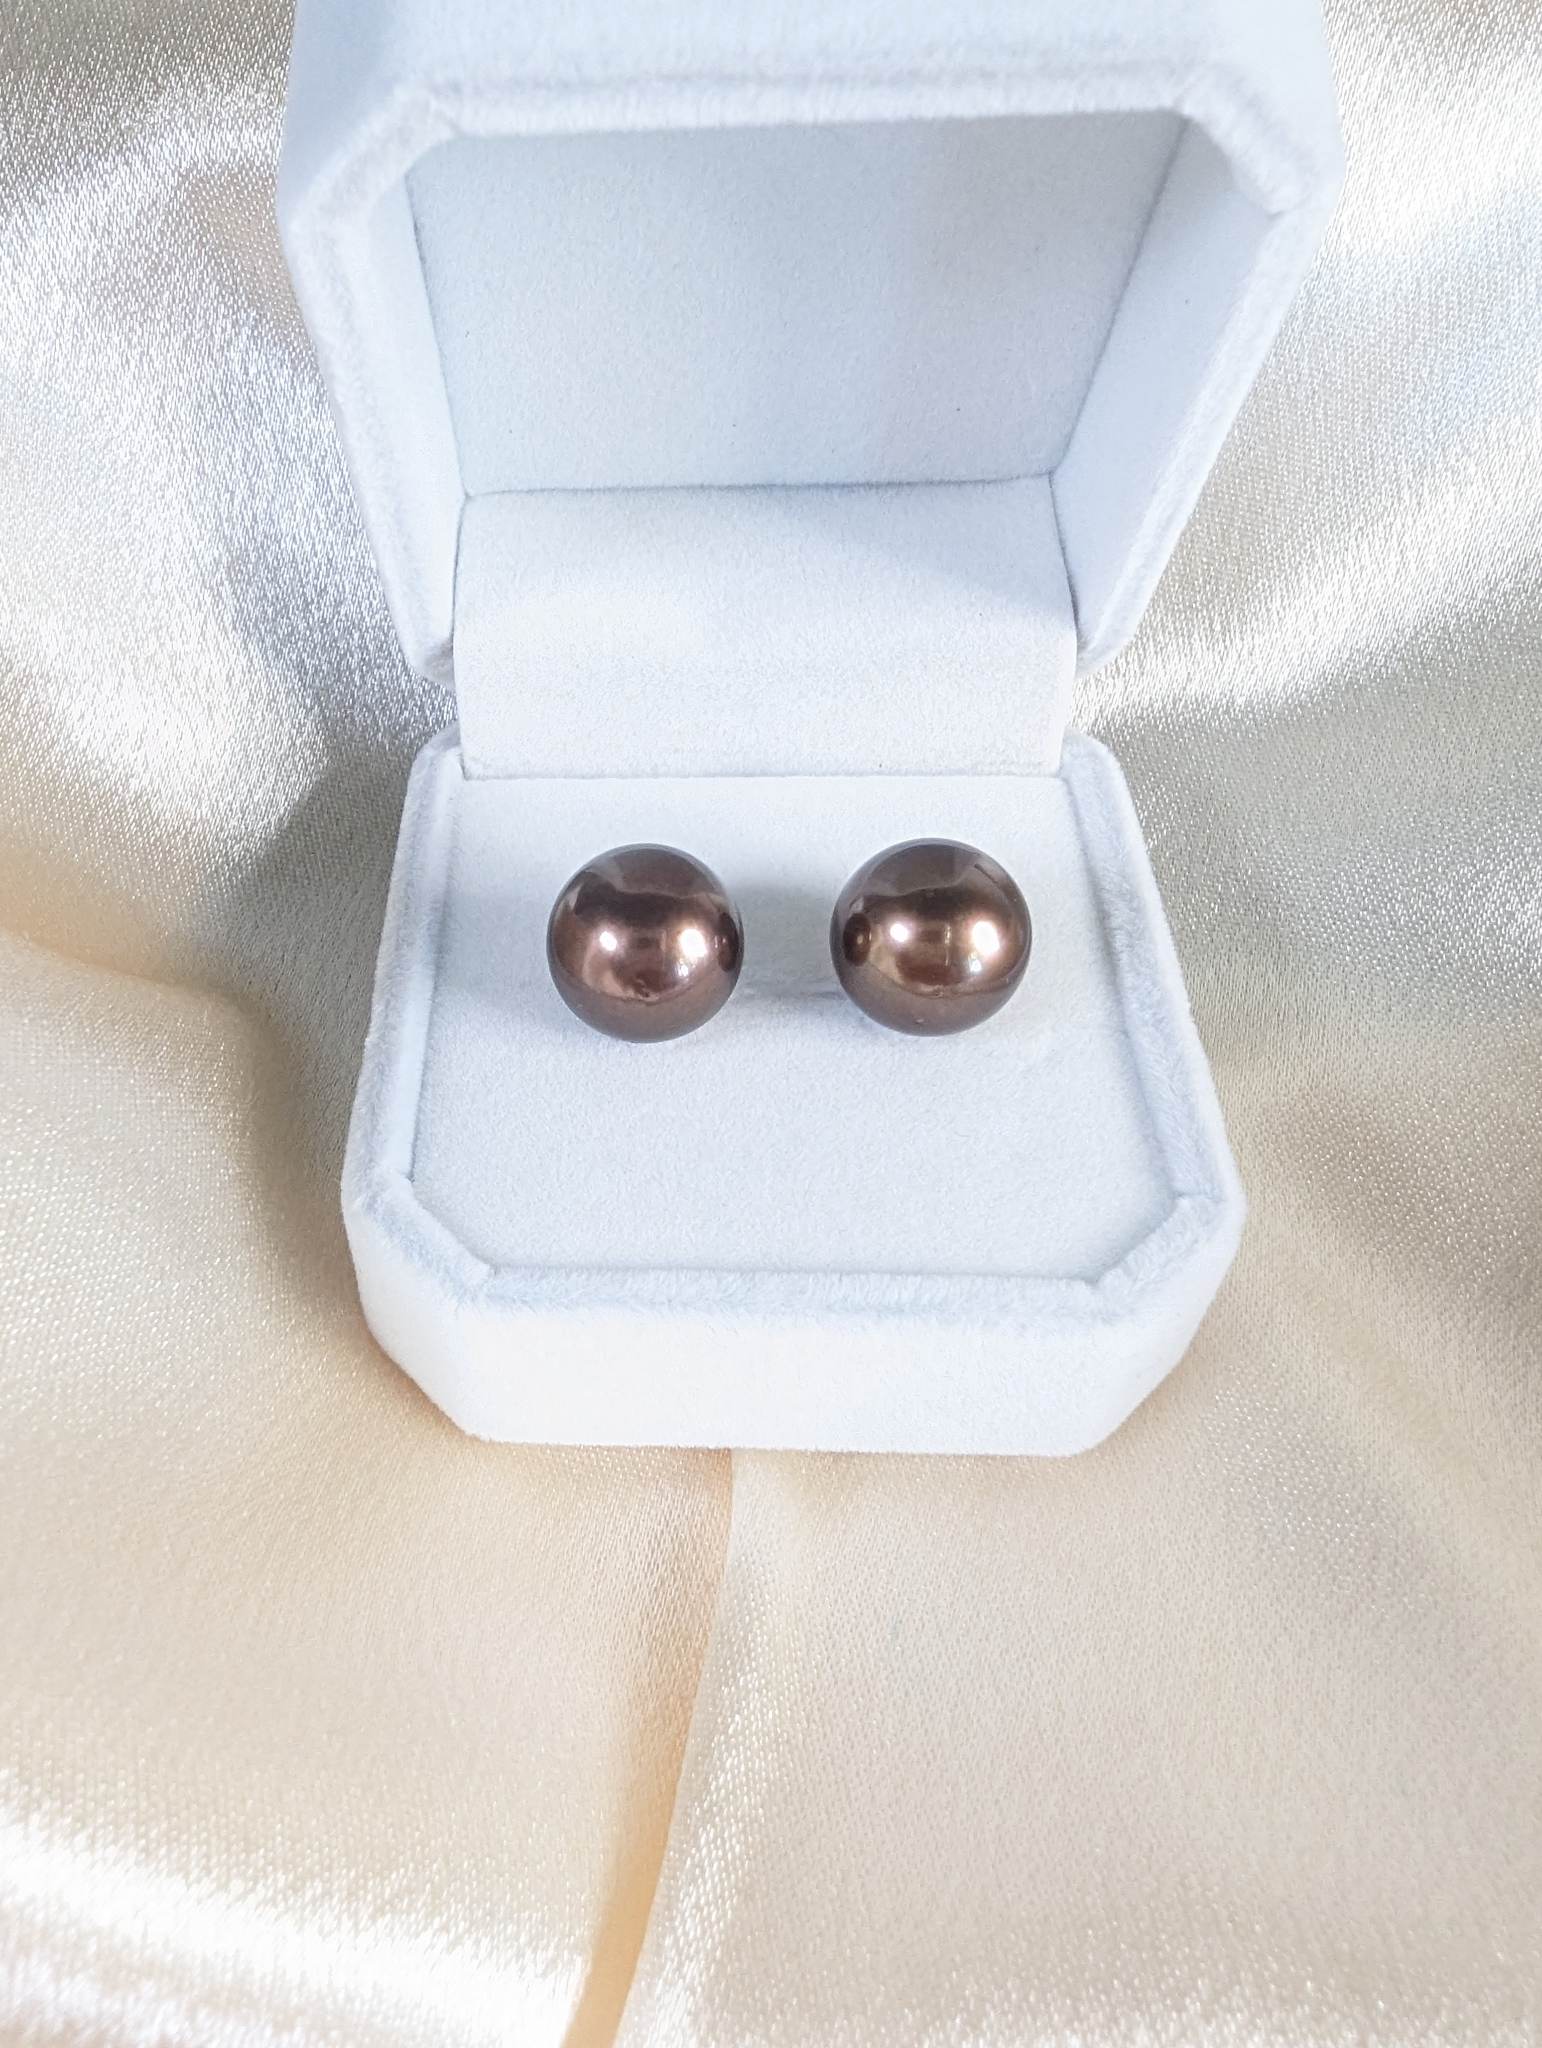 South Sea Pearl 12 mm size Stud Earrings in 14 karat solid gold settings with lifters